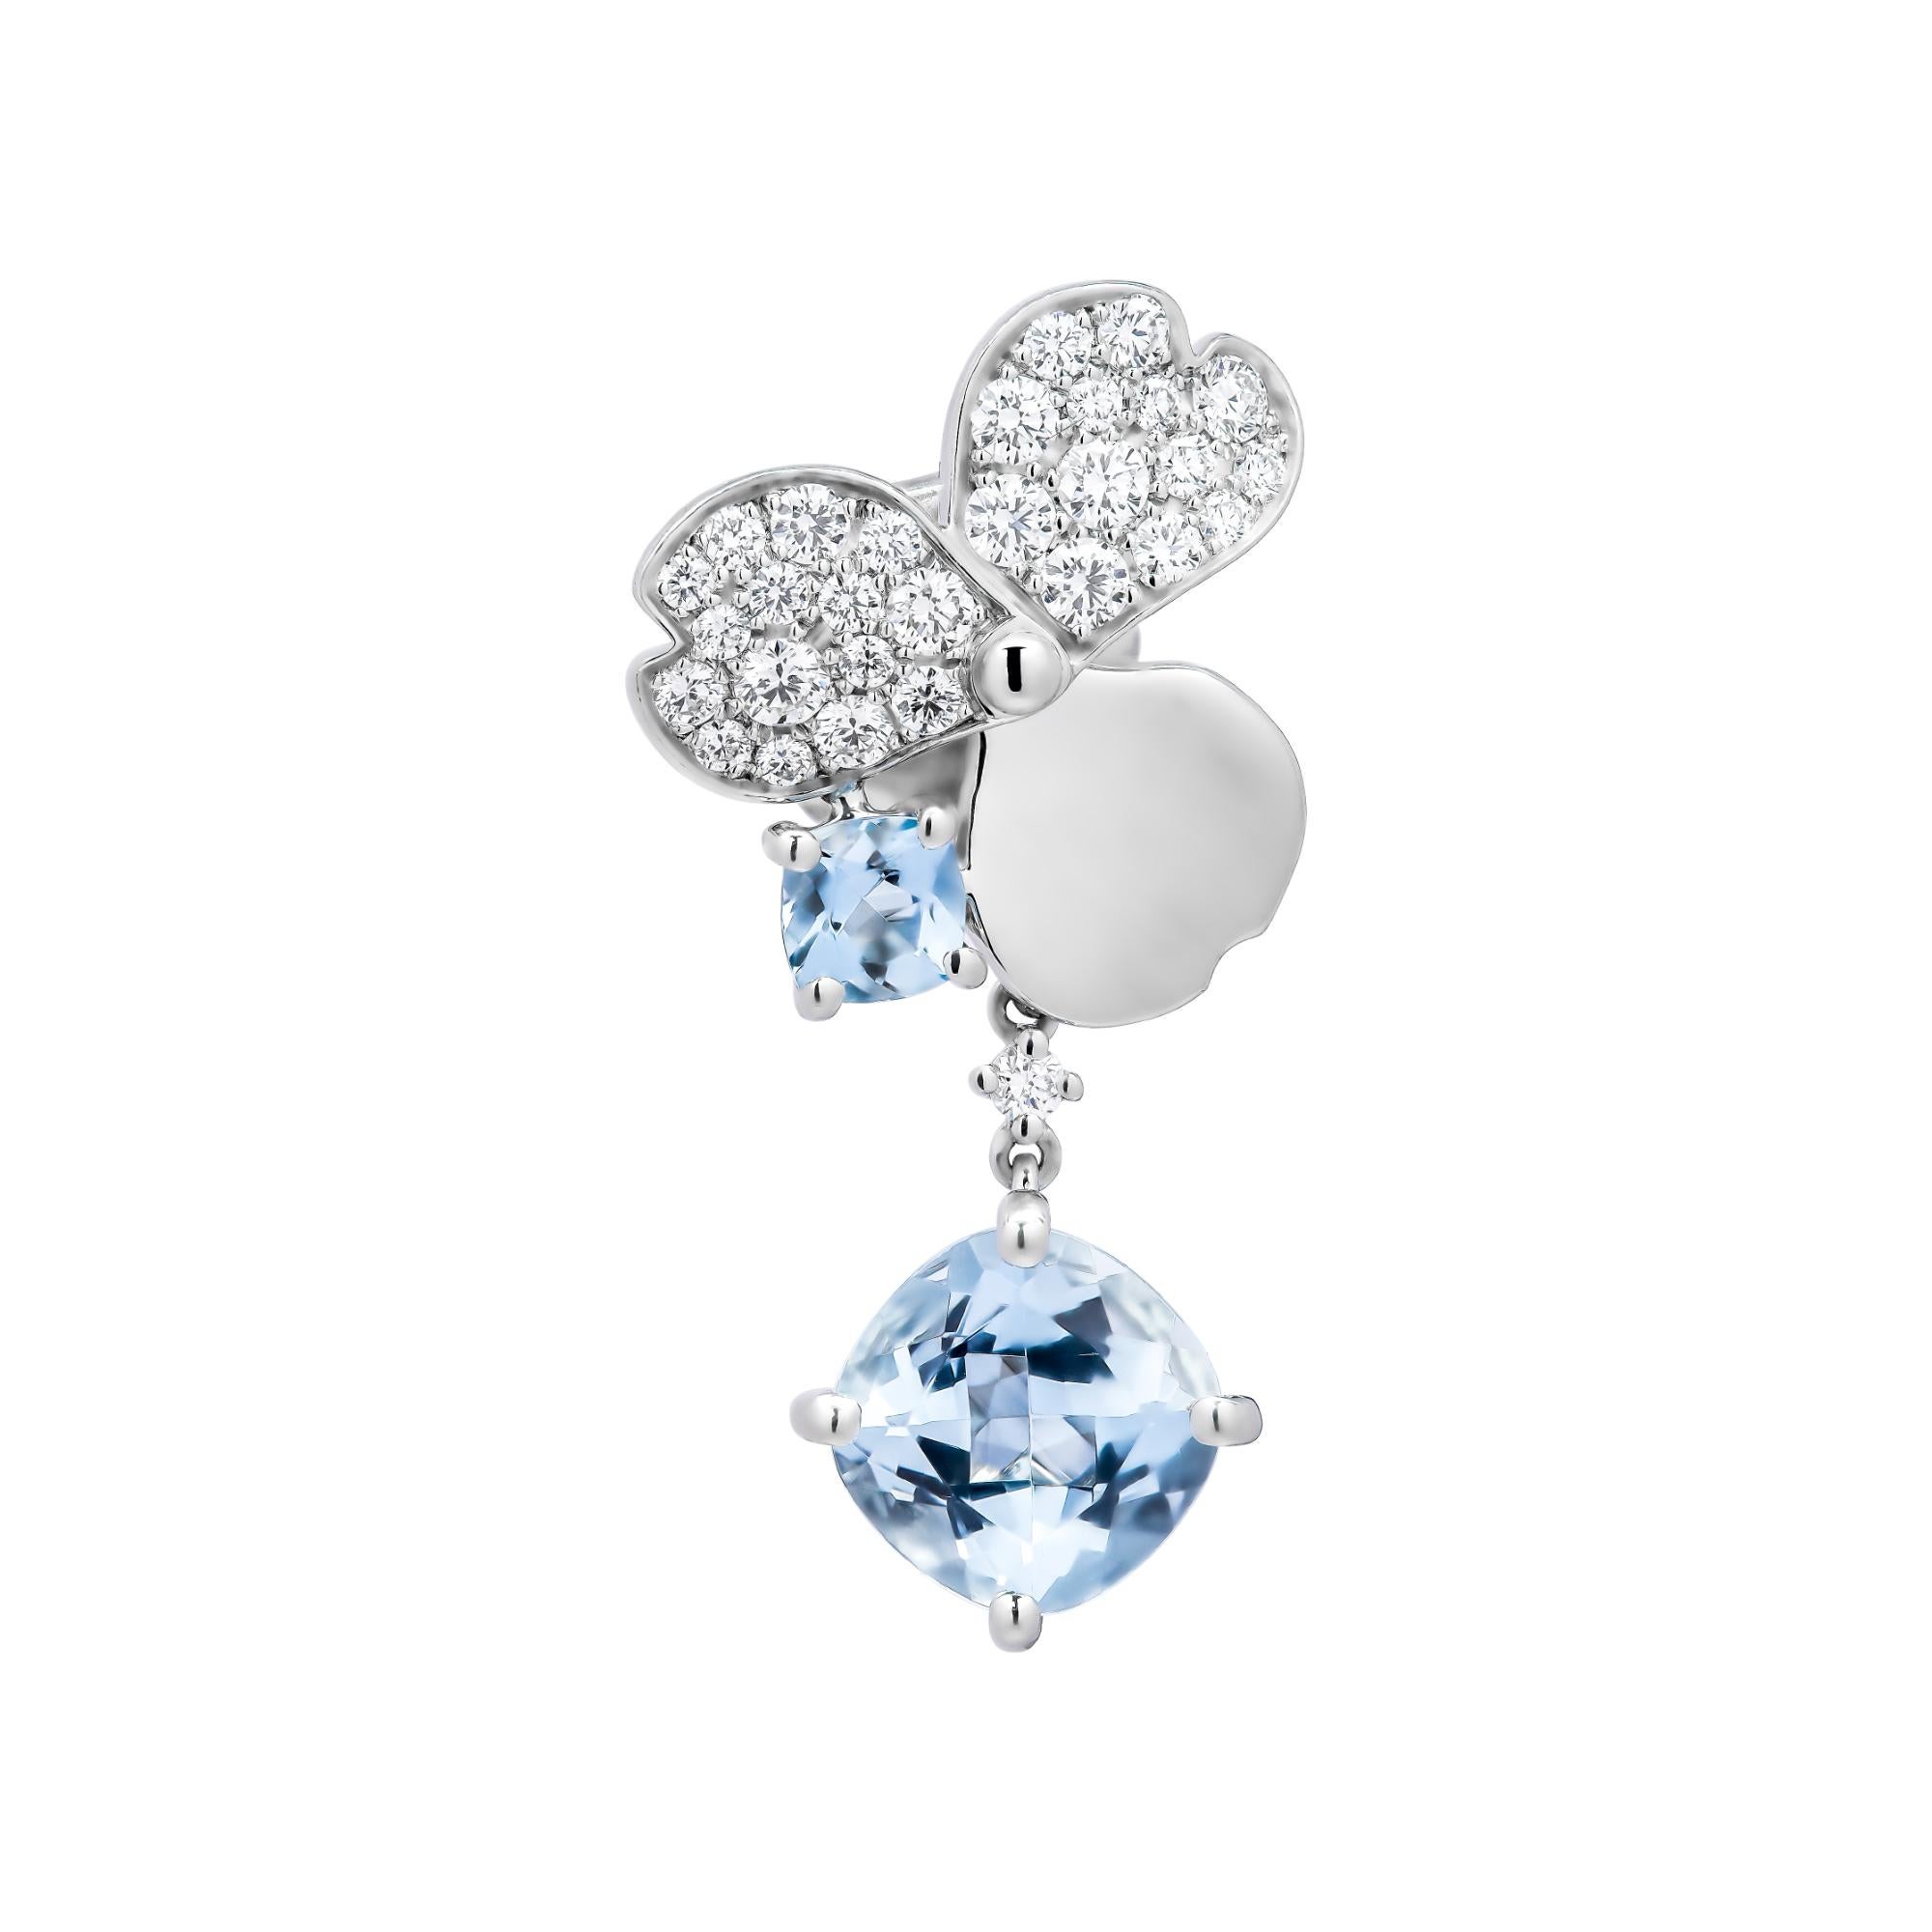 Tiffany Paper Flowers Aquamarine Single Drop Earring in Platinum with Diamonds
Platinum encrusted with round brilliant diamonds and cushion-cut aquamarines
Flowers, 14.5 x 14 mm each
Round brilliant diamonds, carat total weight .50
Total length: